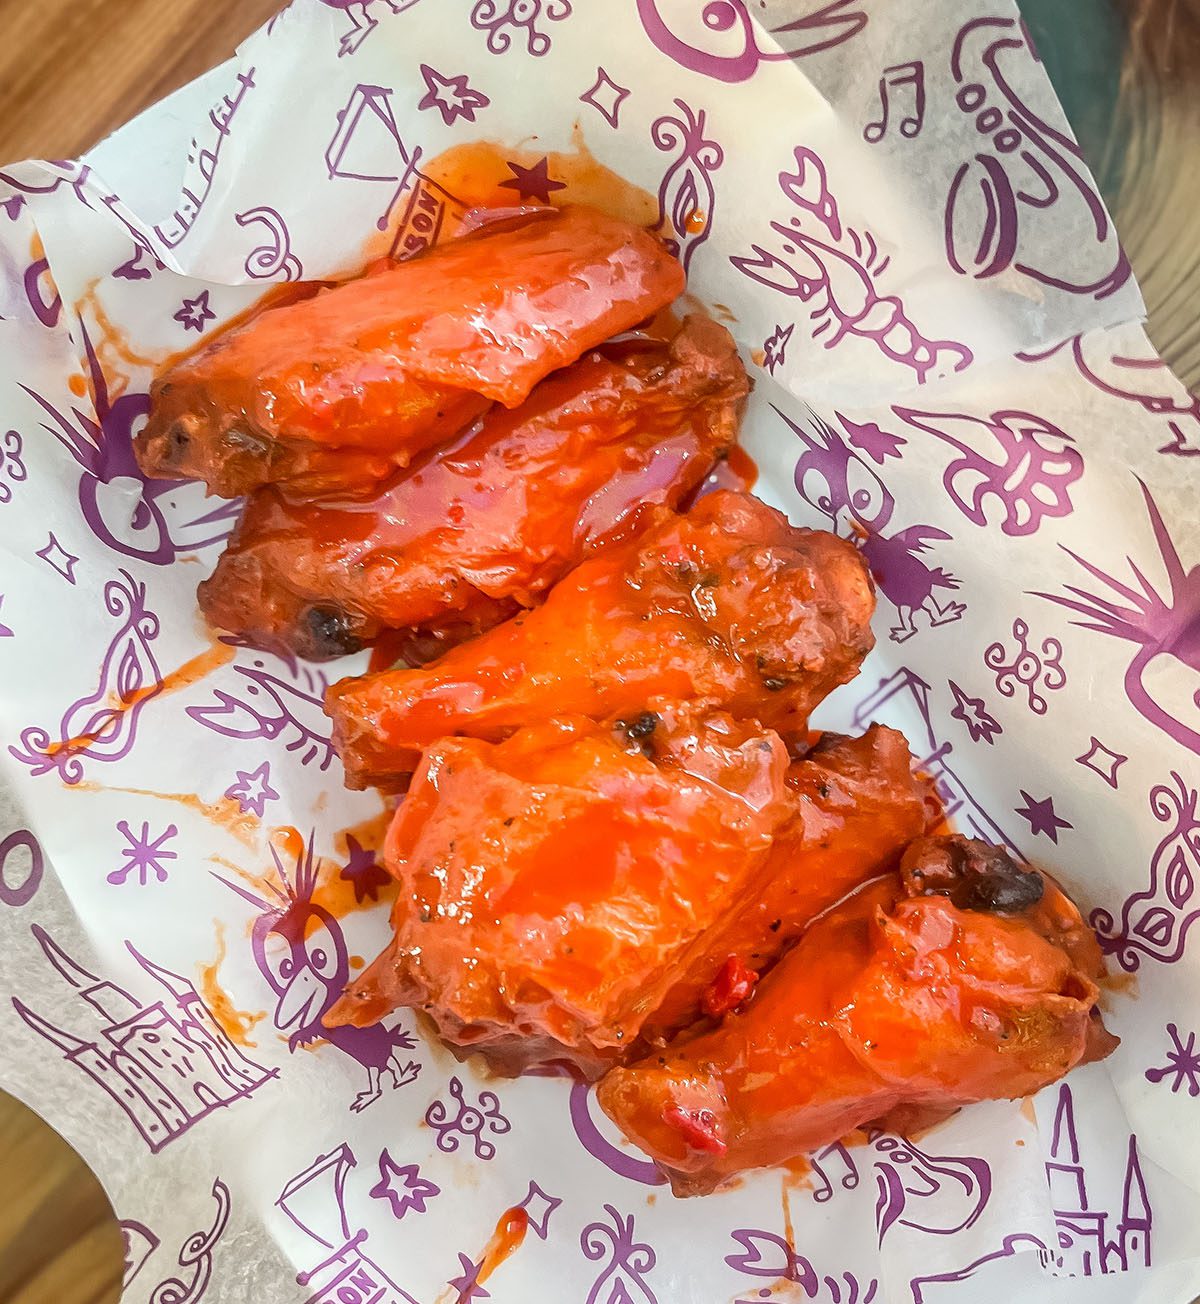 Buffalo Wings - Voodoo Chicken and Daiquiris - New Orleans, Louisiana - Downtown, French Quarter, CBD, Canal St.